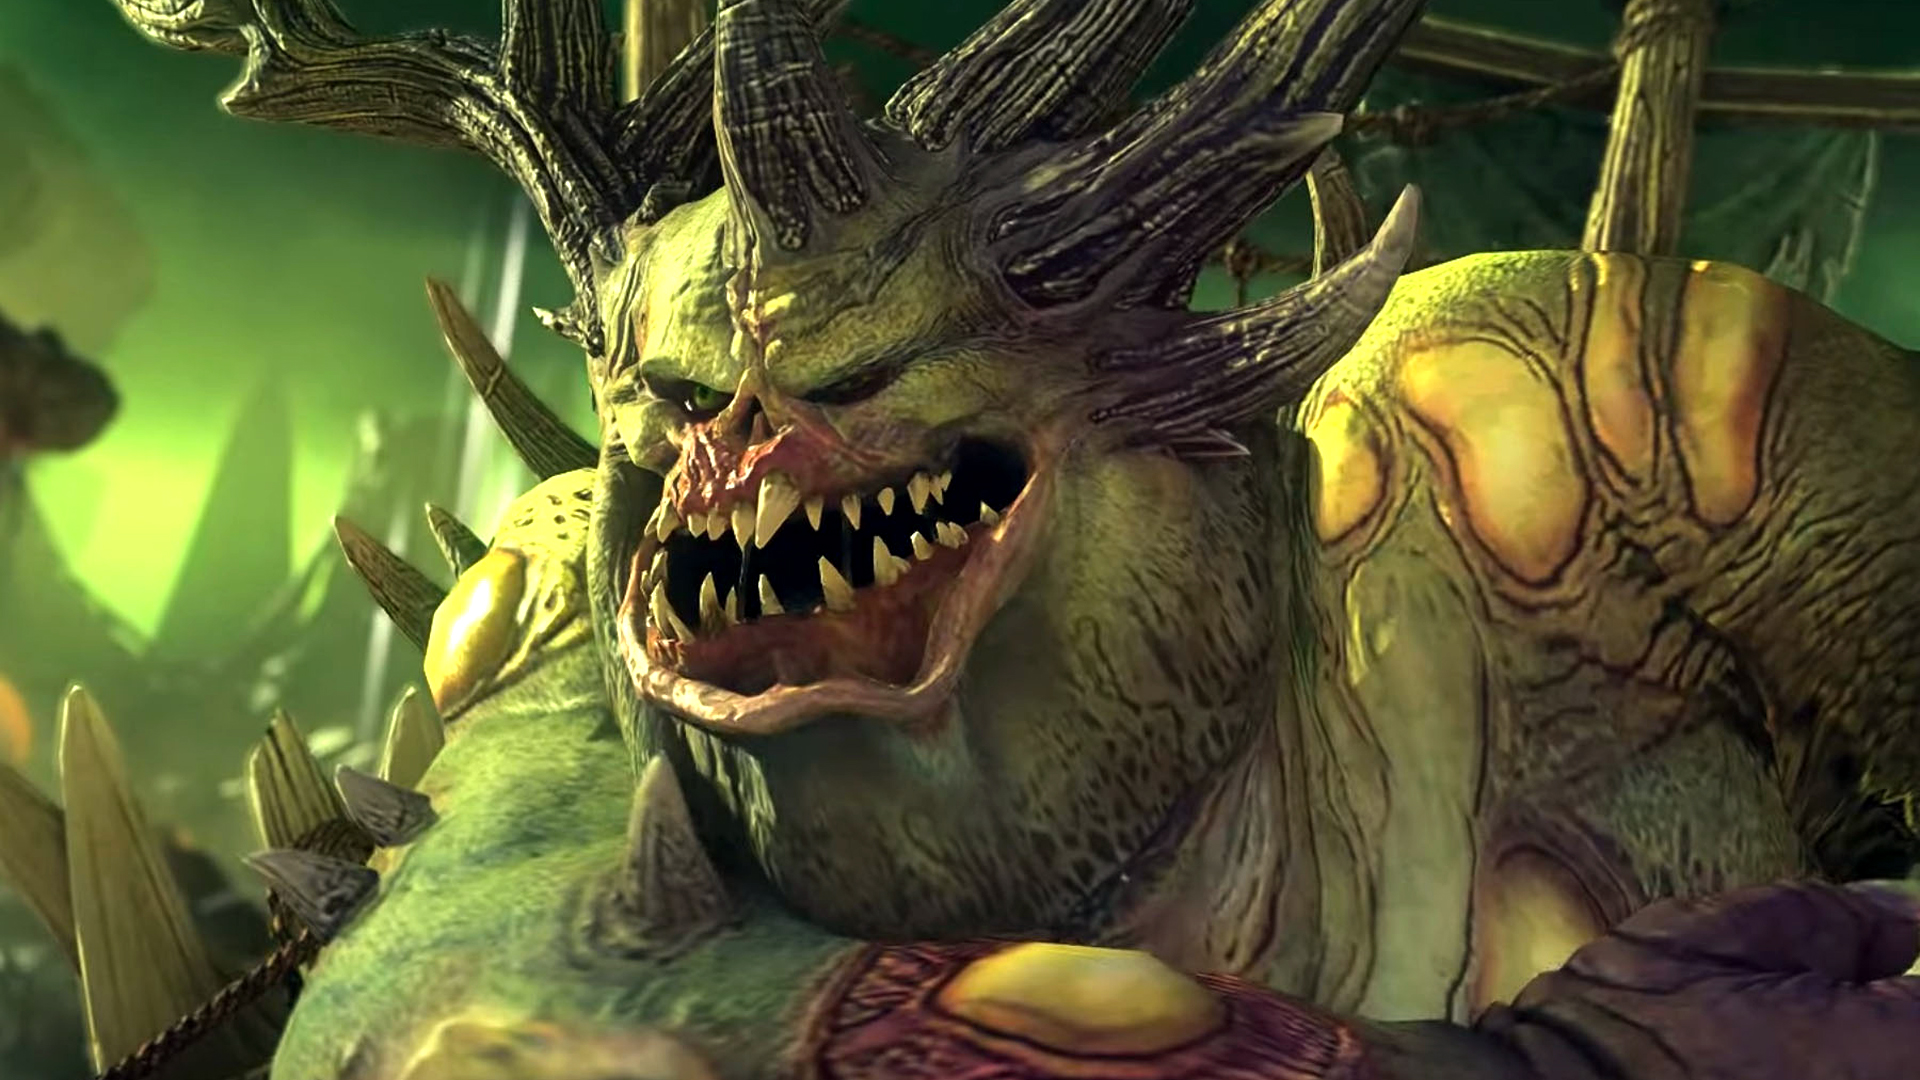 Total War Warhammer 3 has three “new experiences” coming this year